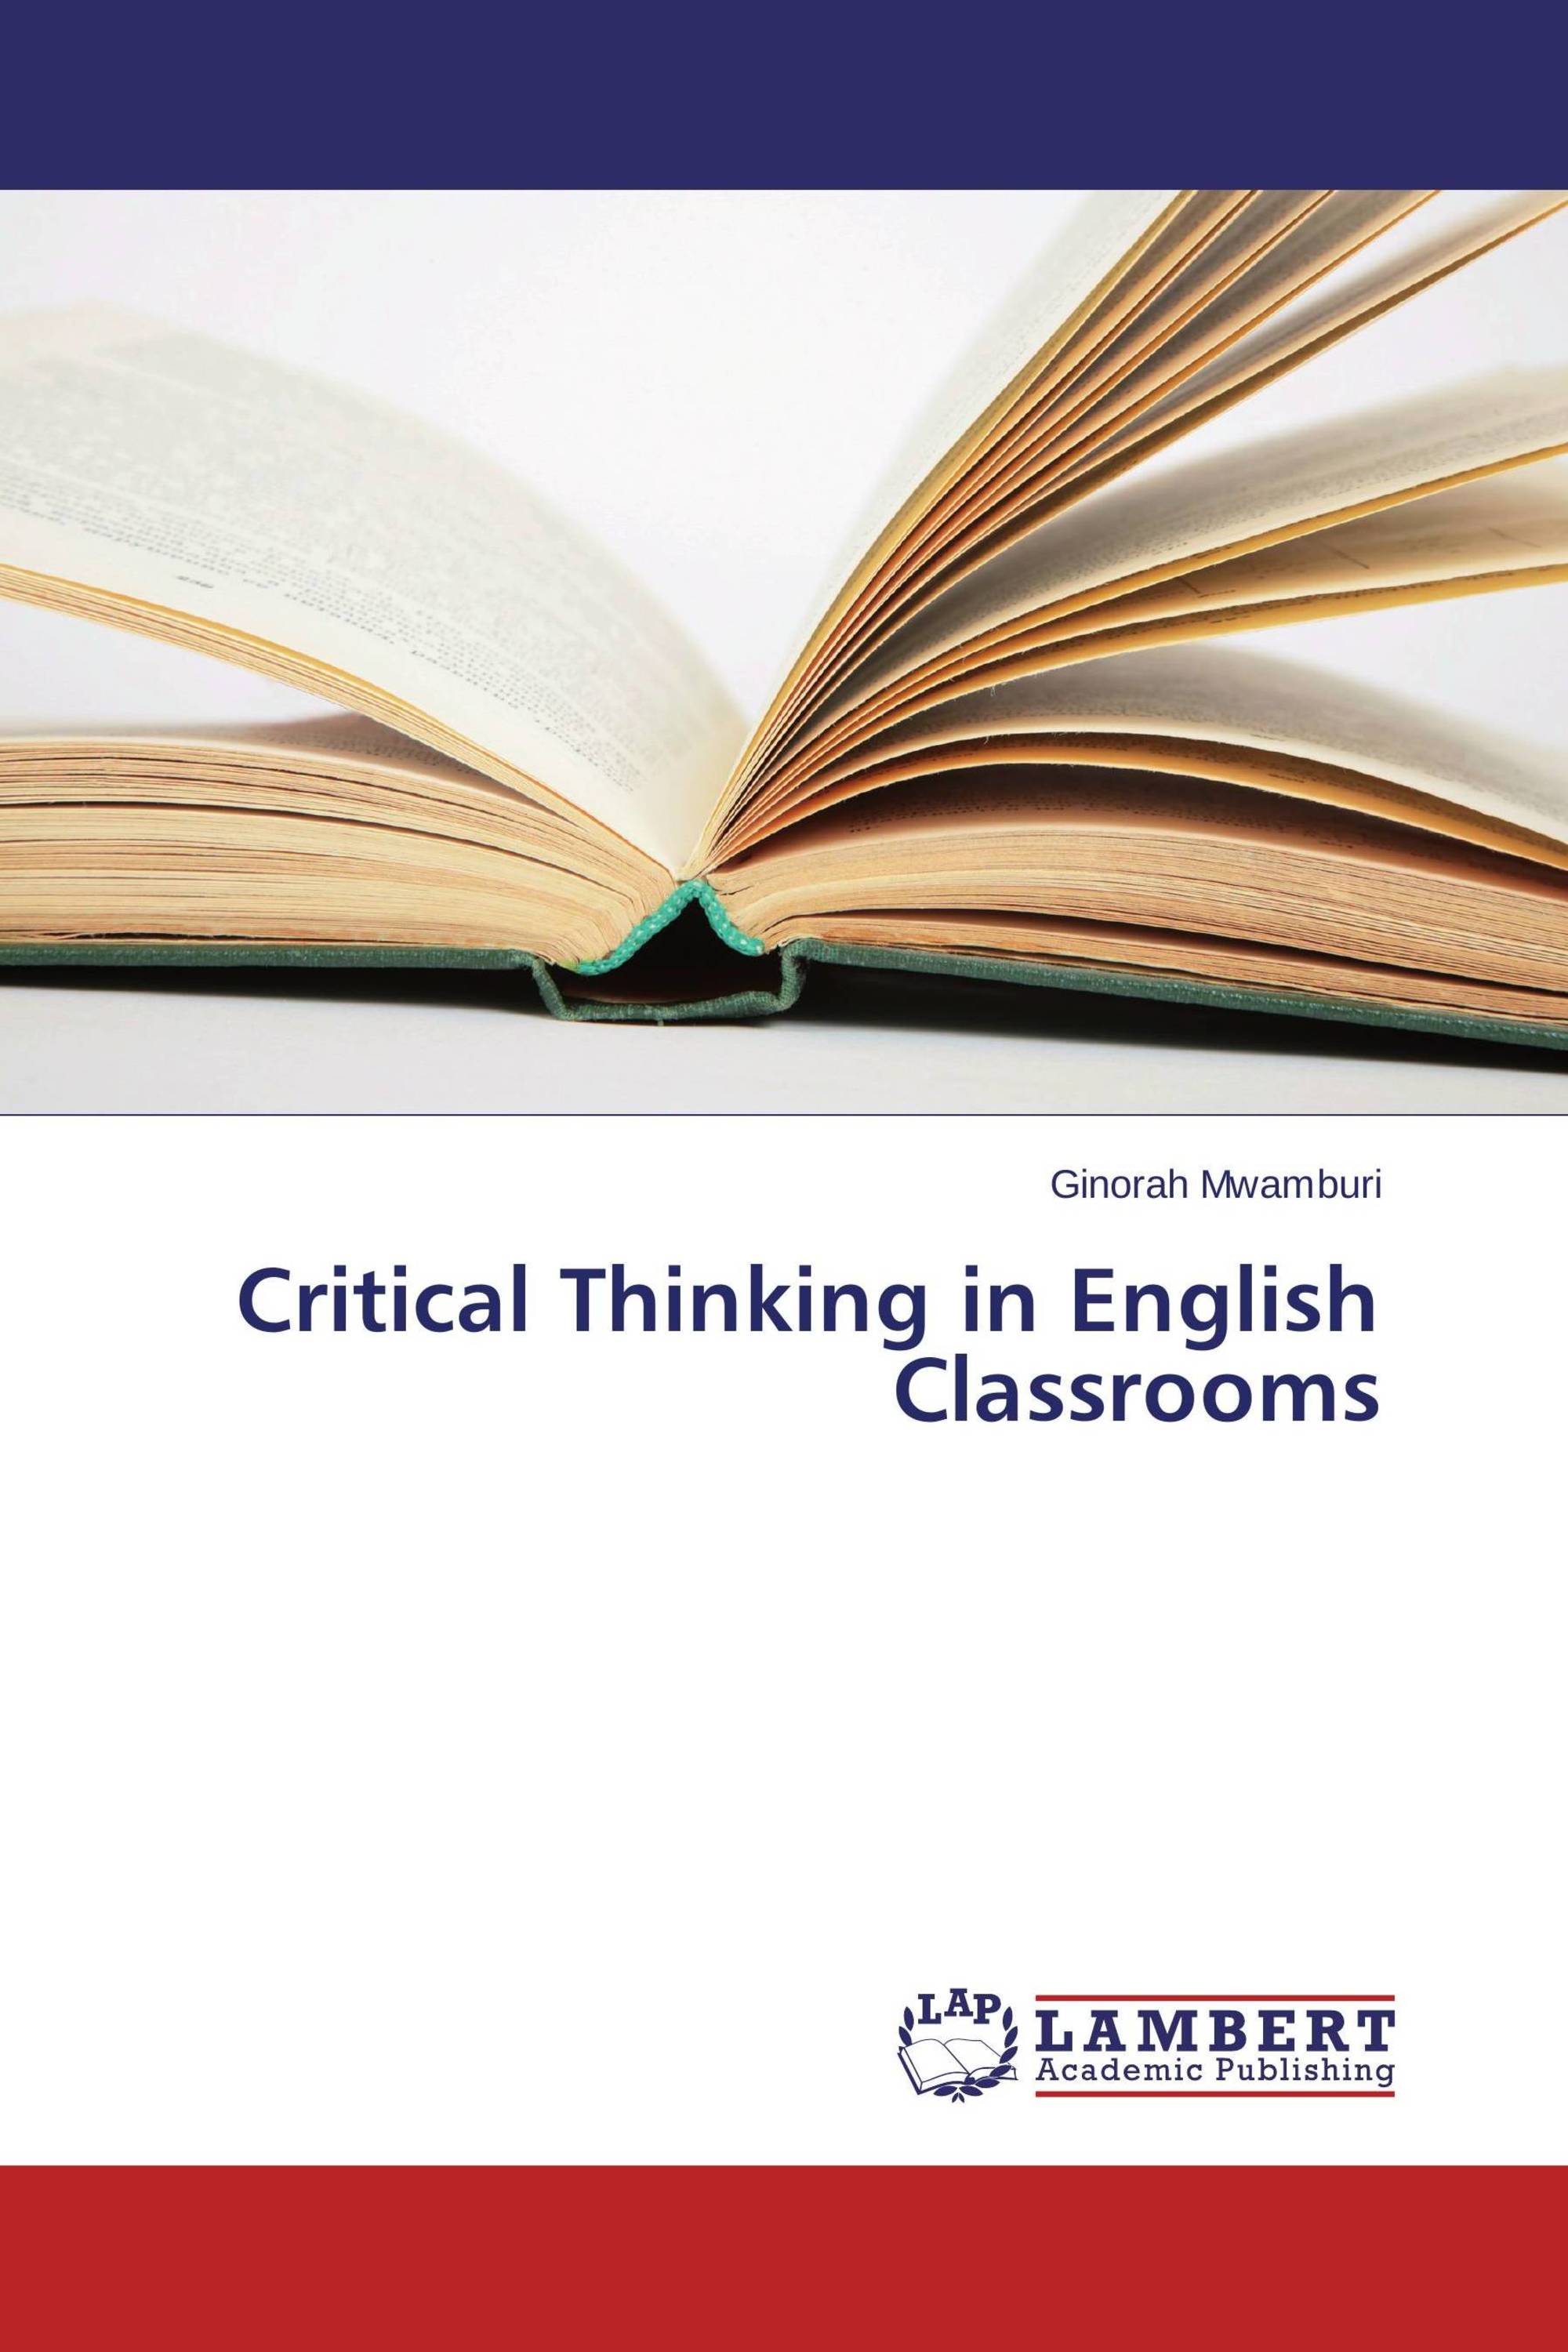 is critical thinking an english class